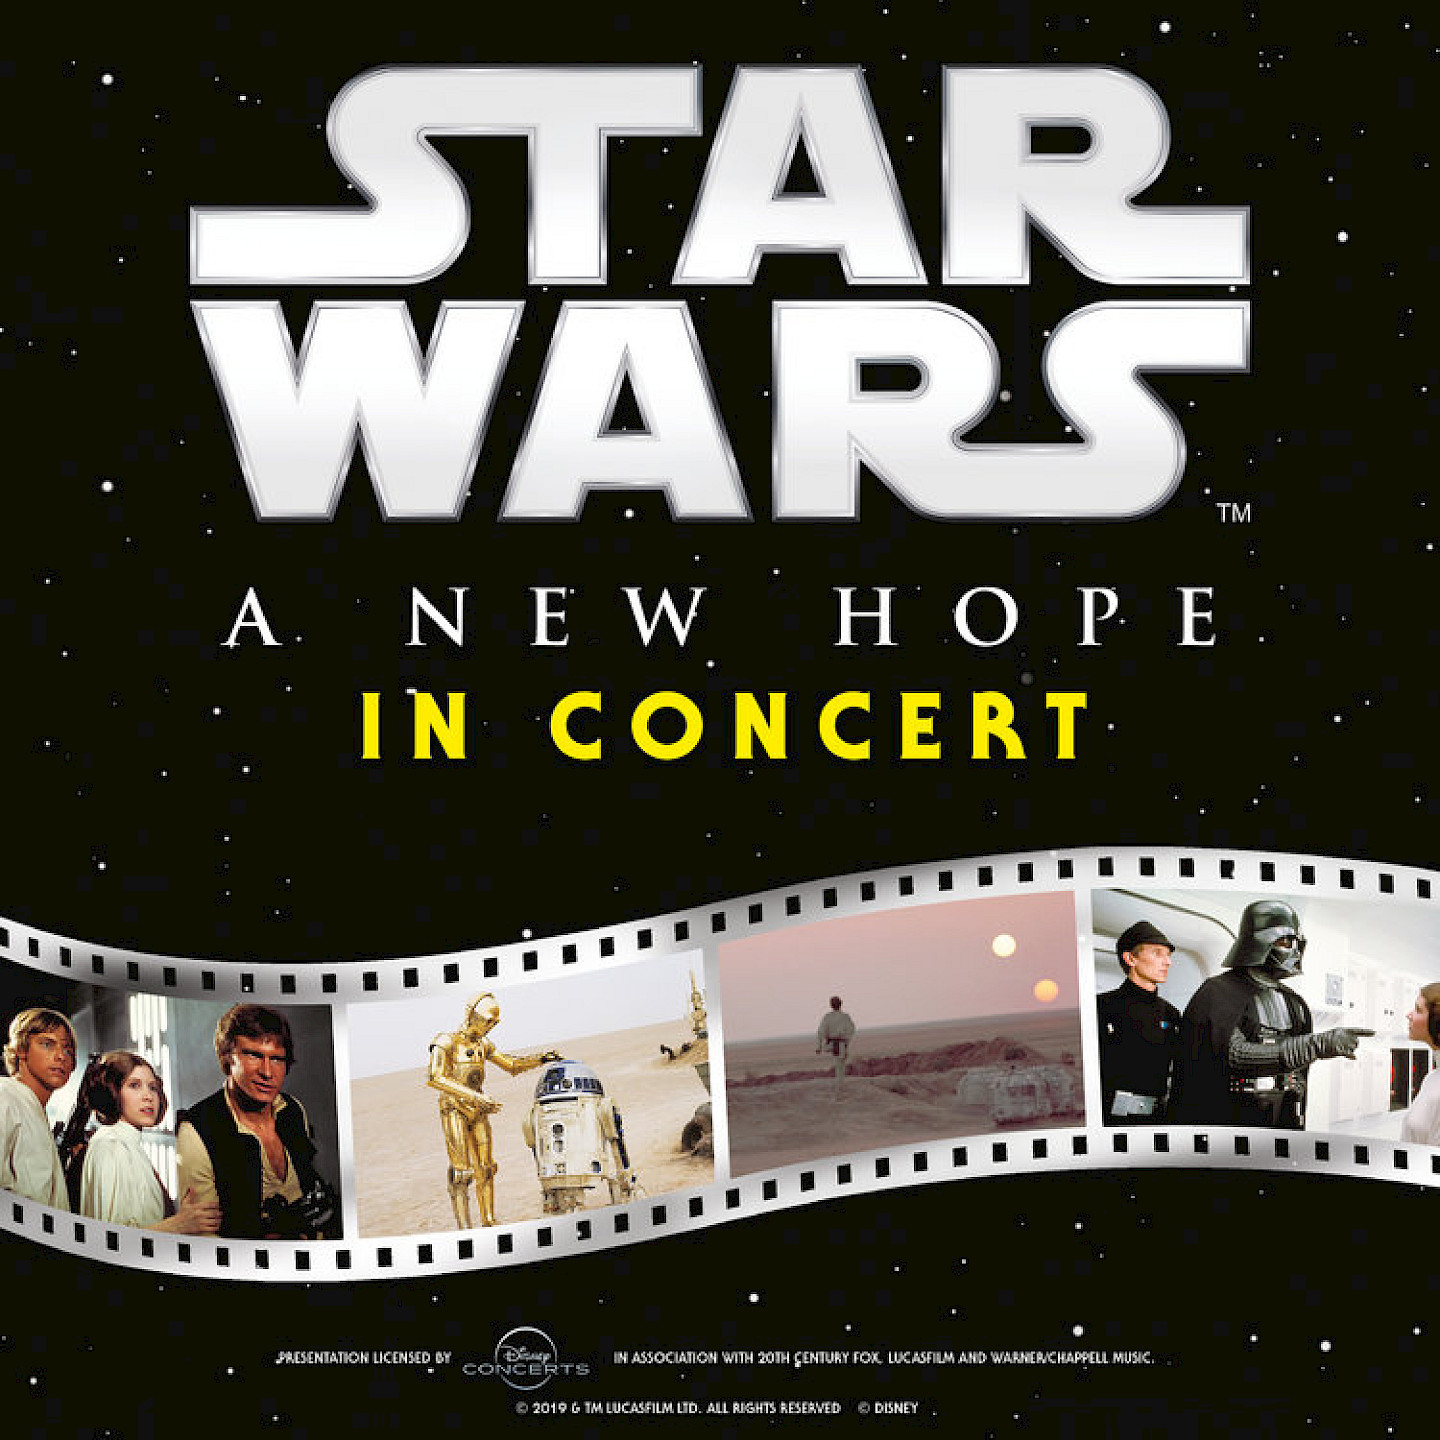 STAR WARS in Concert - A New Hope